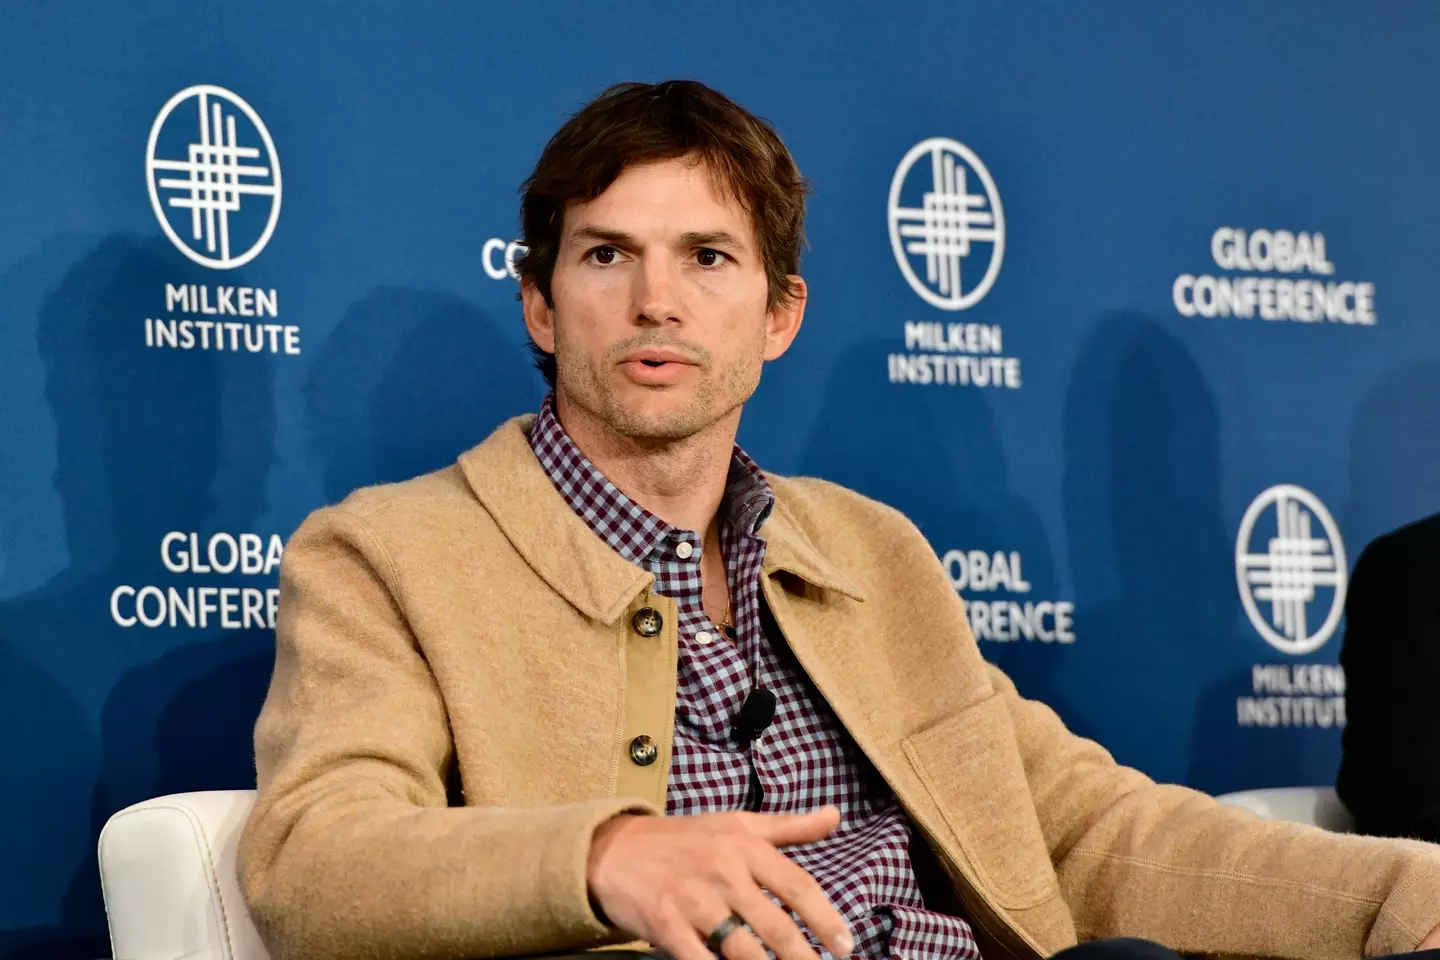 Ashton Kutcher had written letters of support for Masterson during his trial.